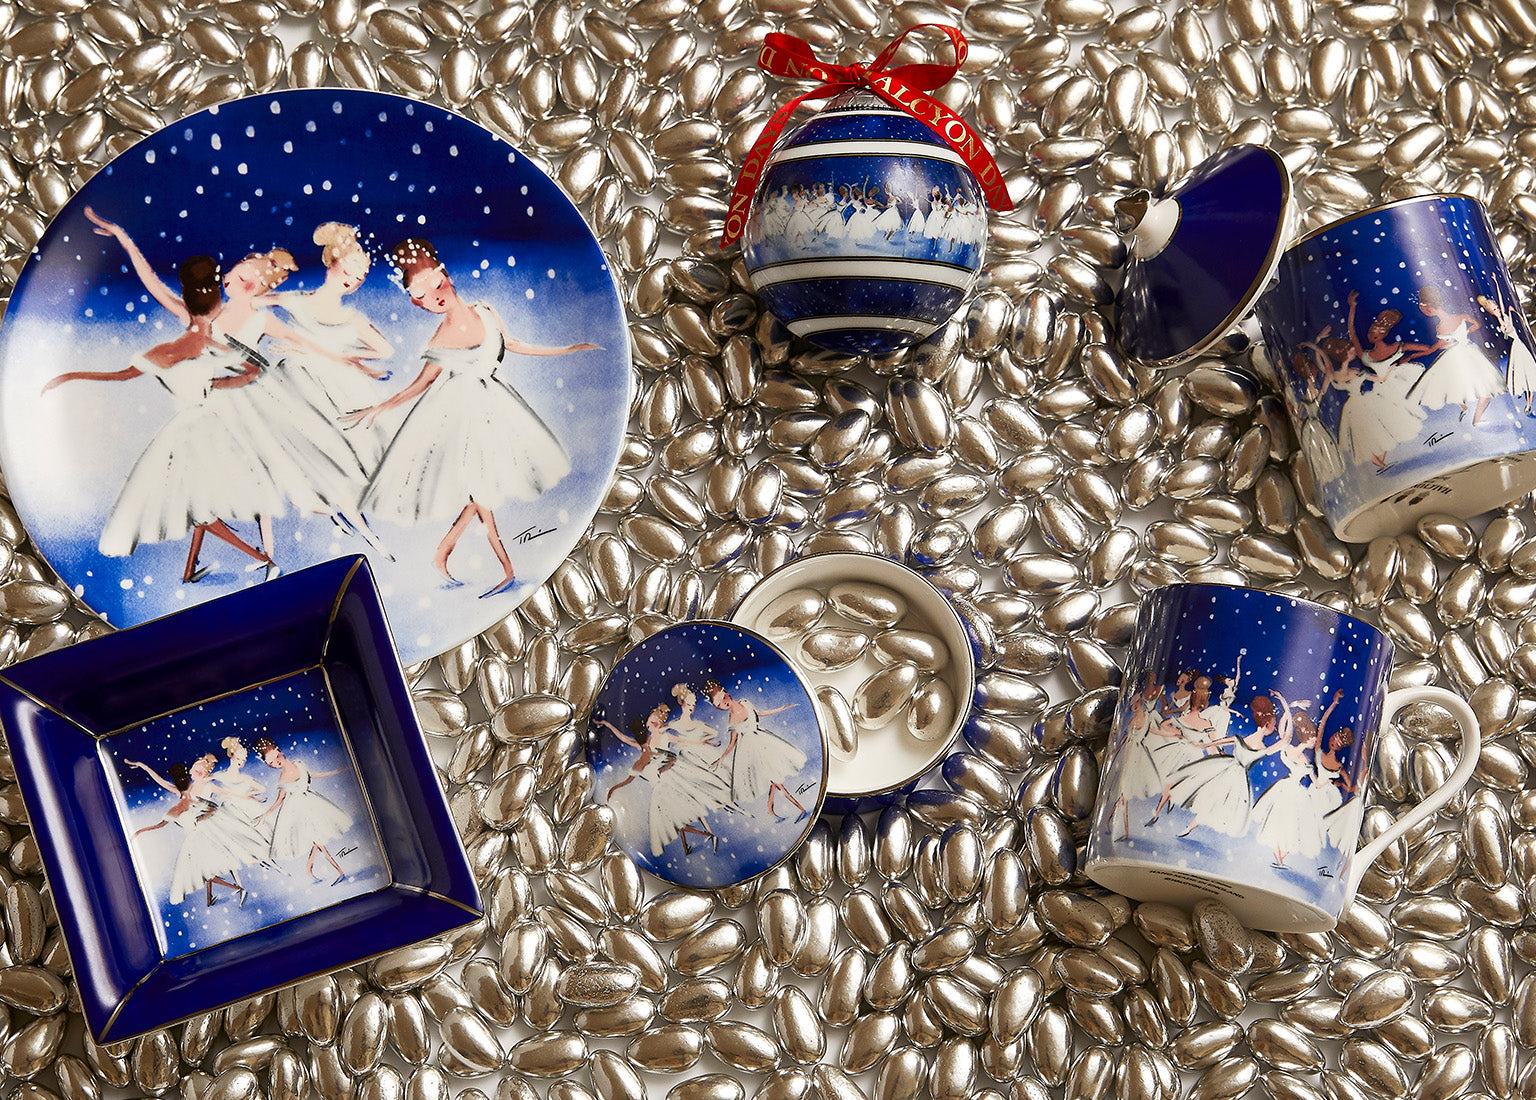 The Waltz of the Snowflakes Collection by Tug Rice